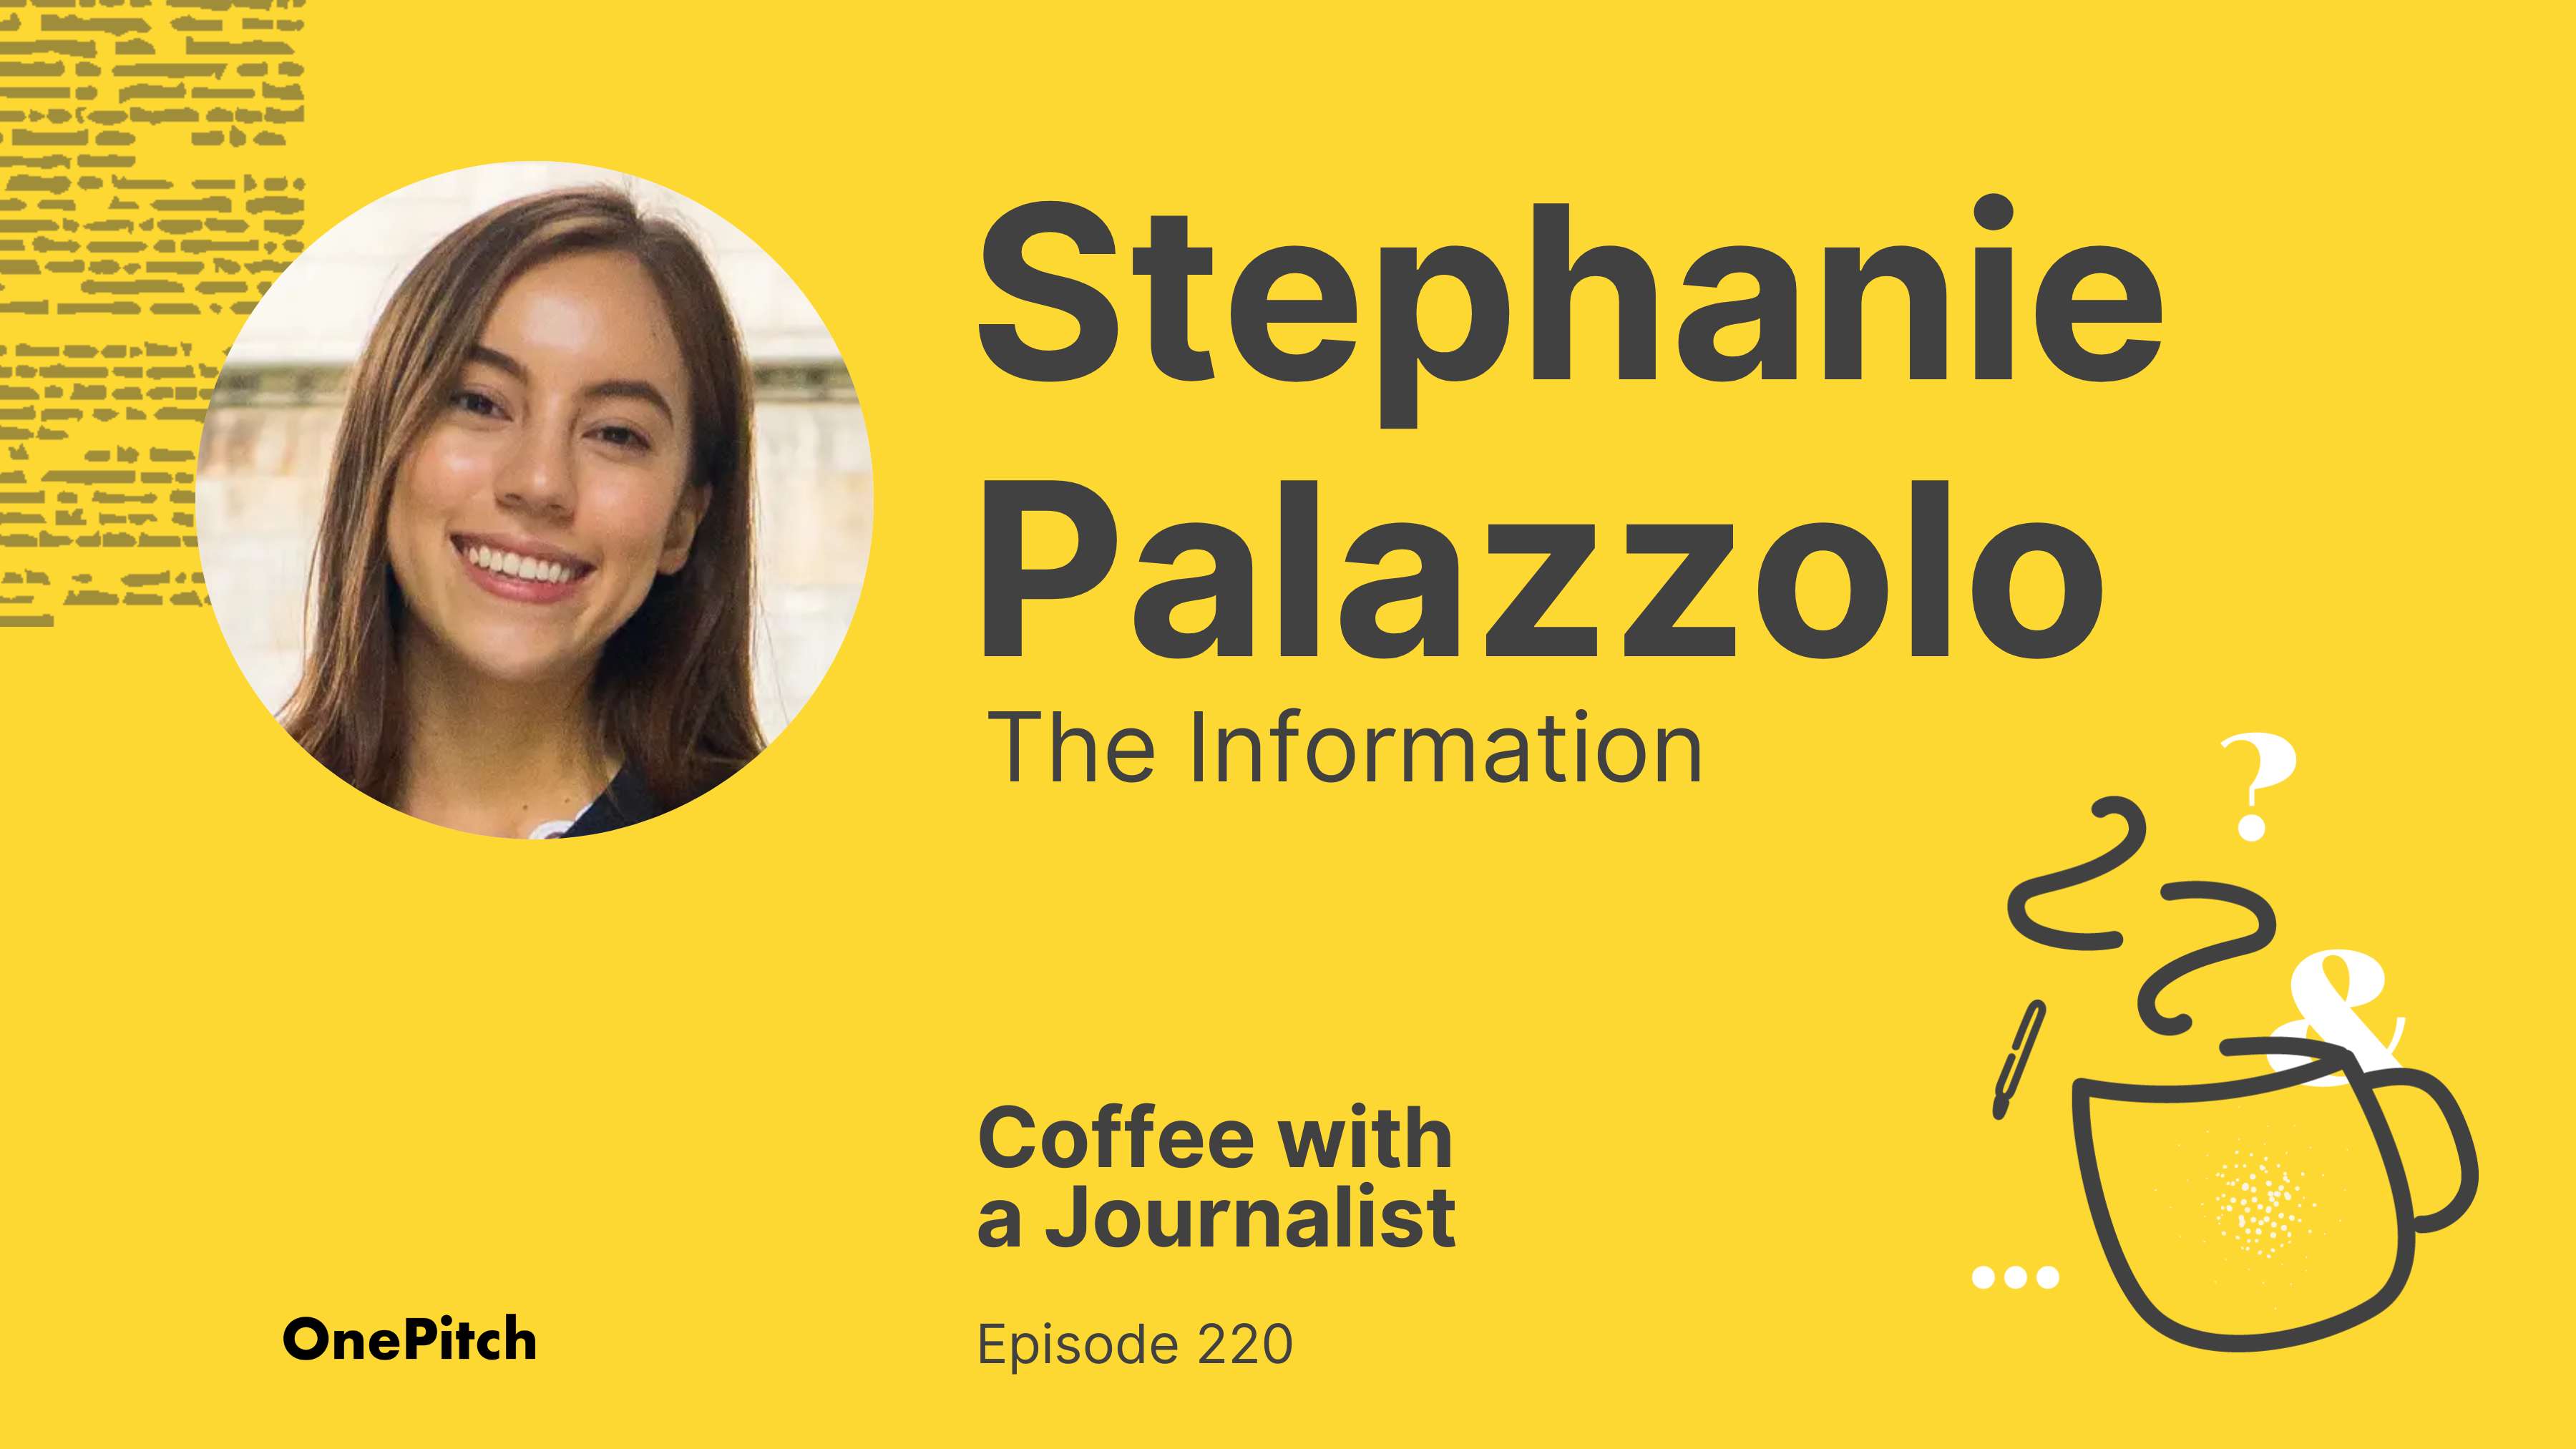 Coffee with a Journalist: Stephanie Palazzolo, The Information